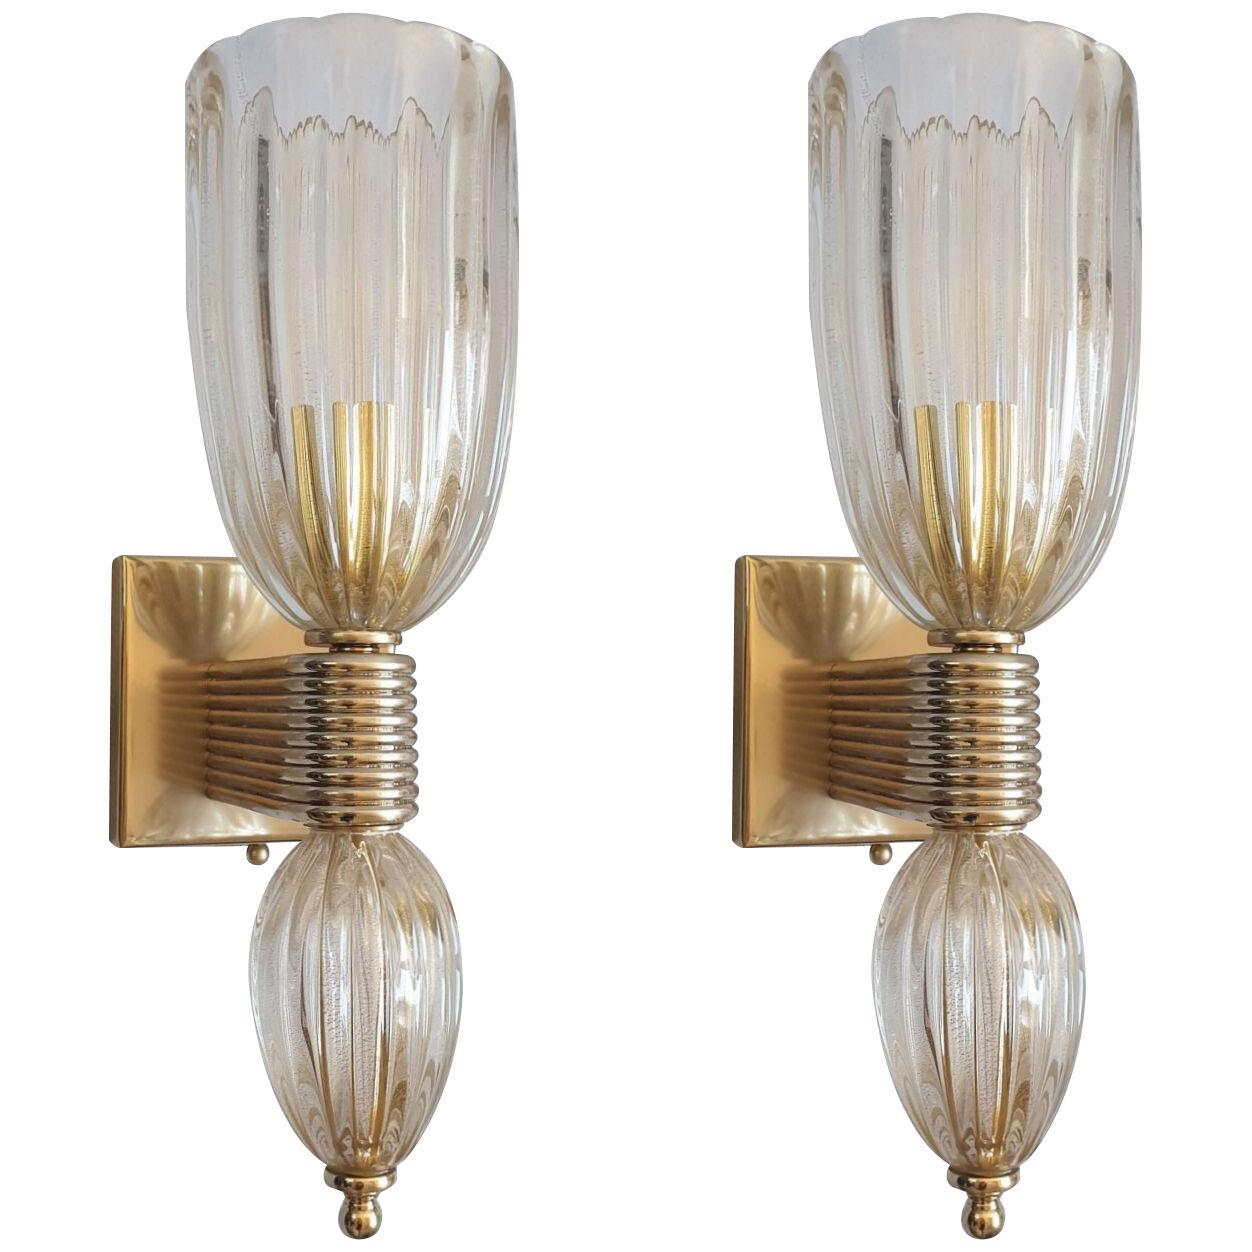 Antique Murano glass and brass sconces, Barovier style - a pair